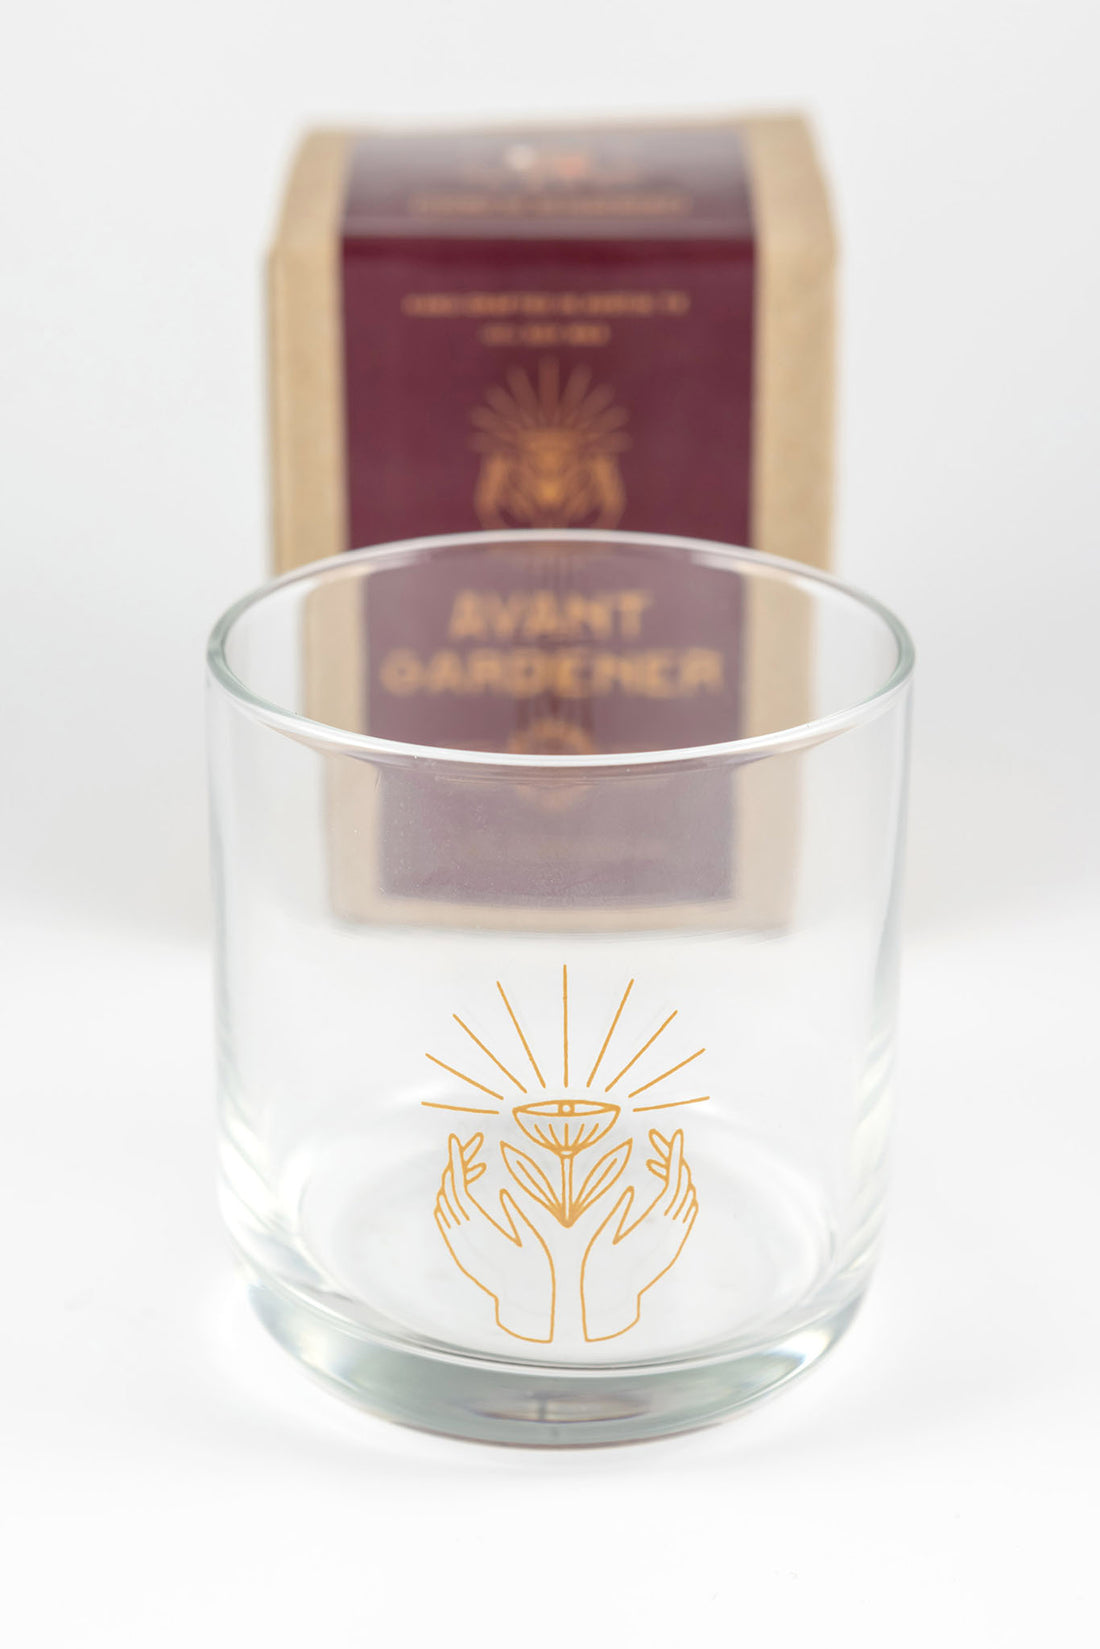 Clear glass with design from avant gardener scent that is empty after being burned and can be recycled